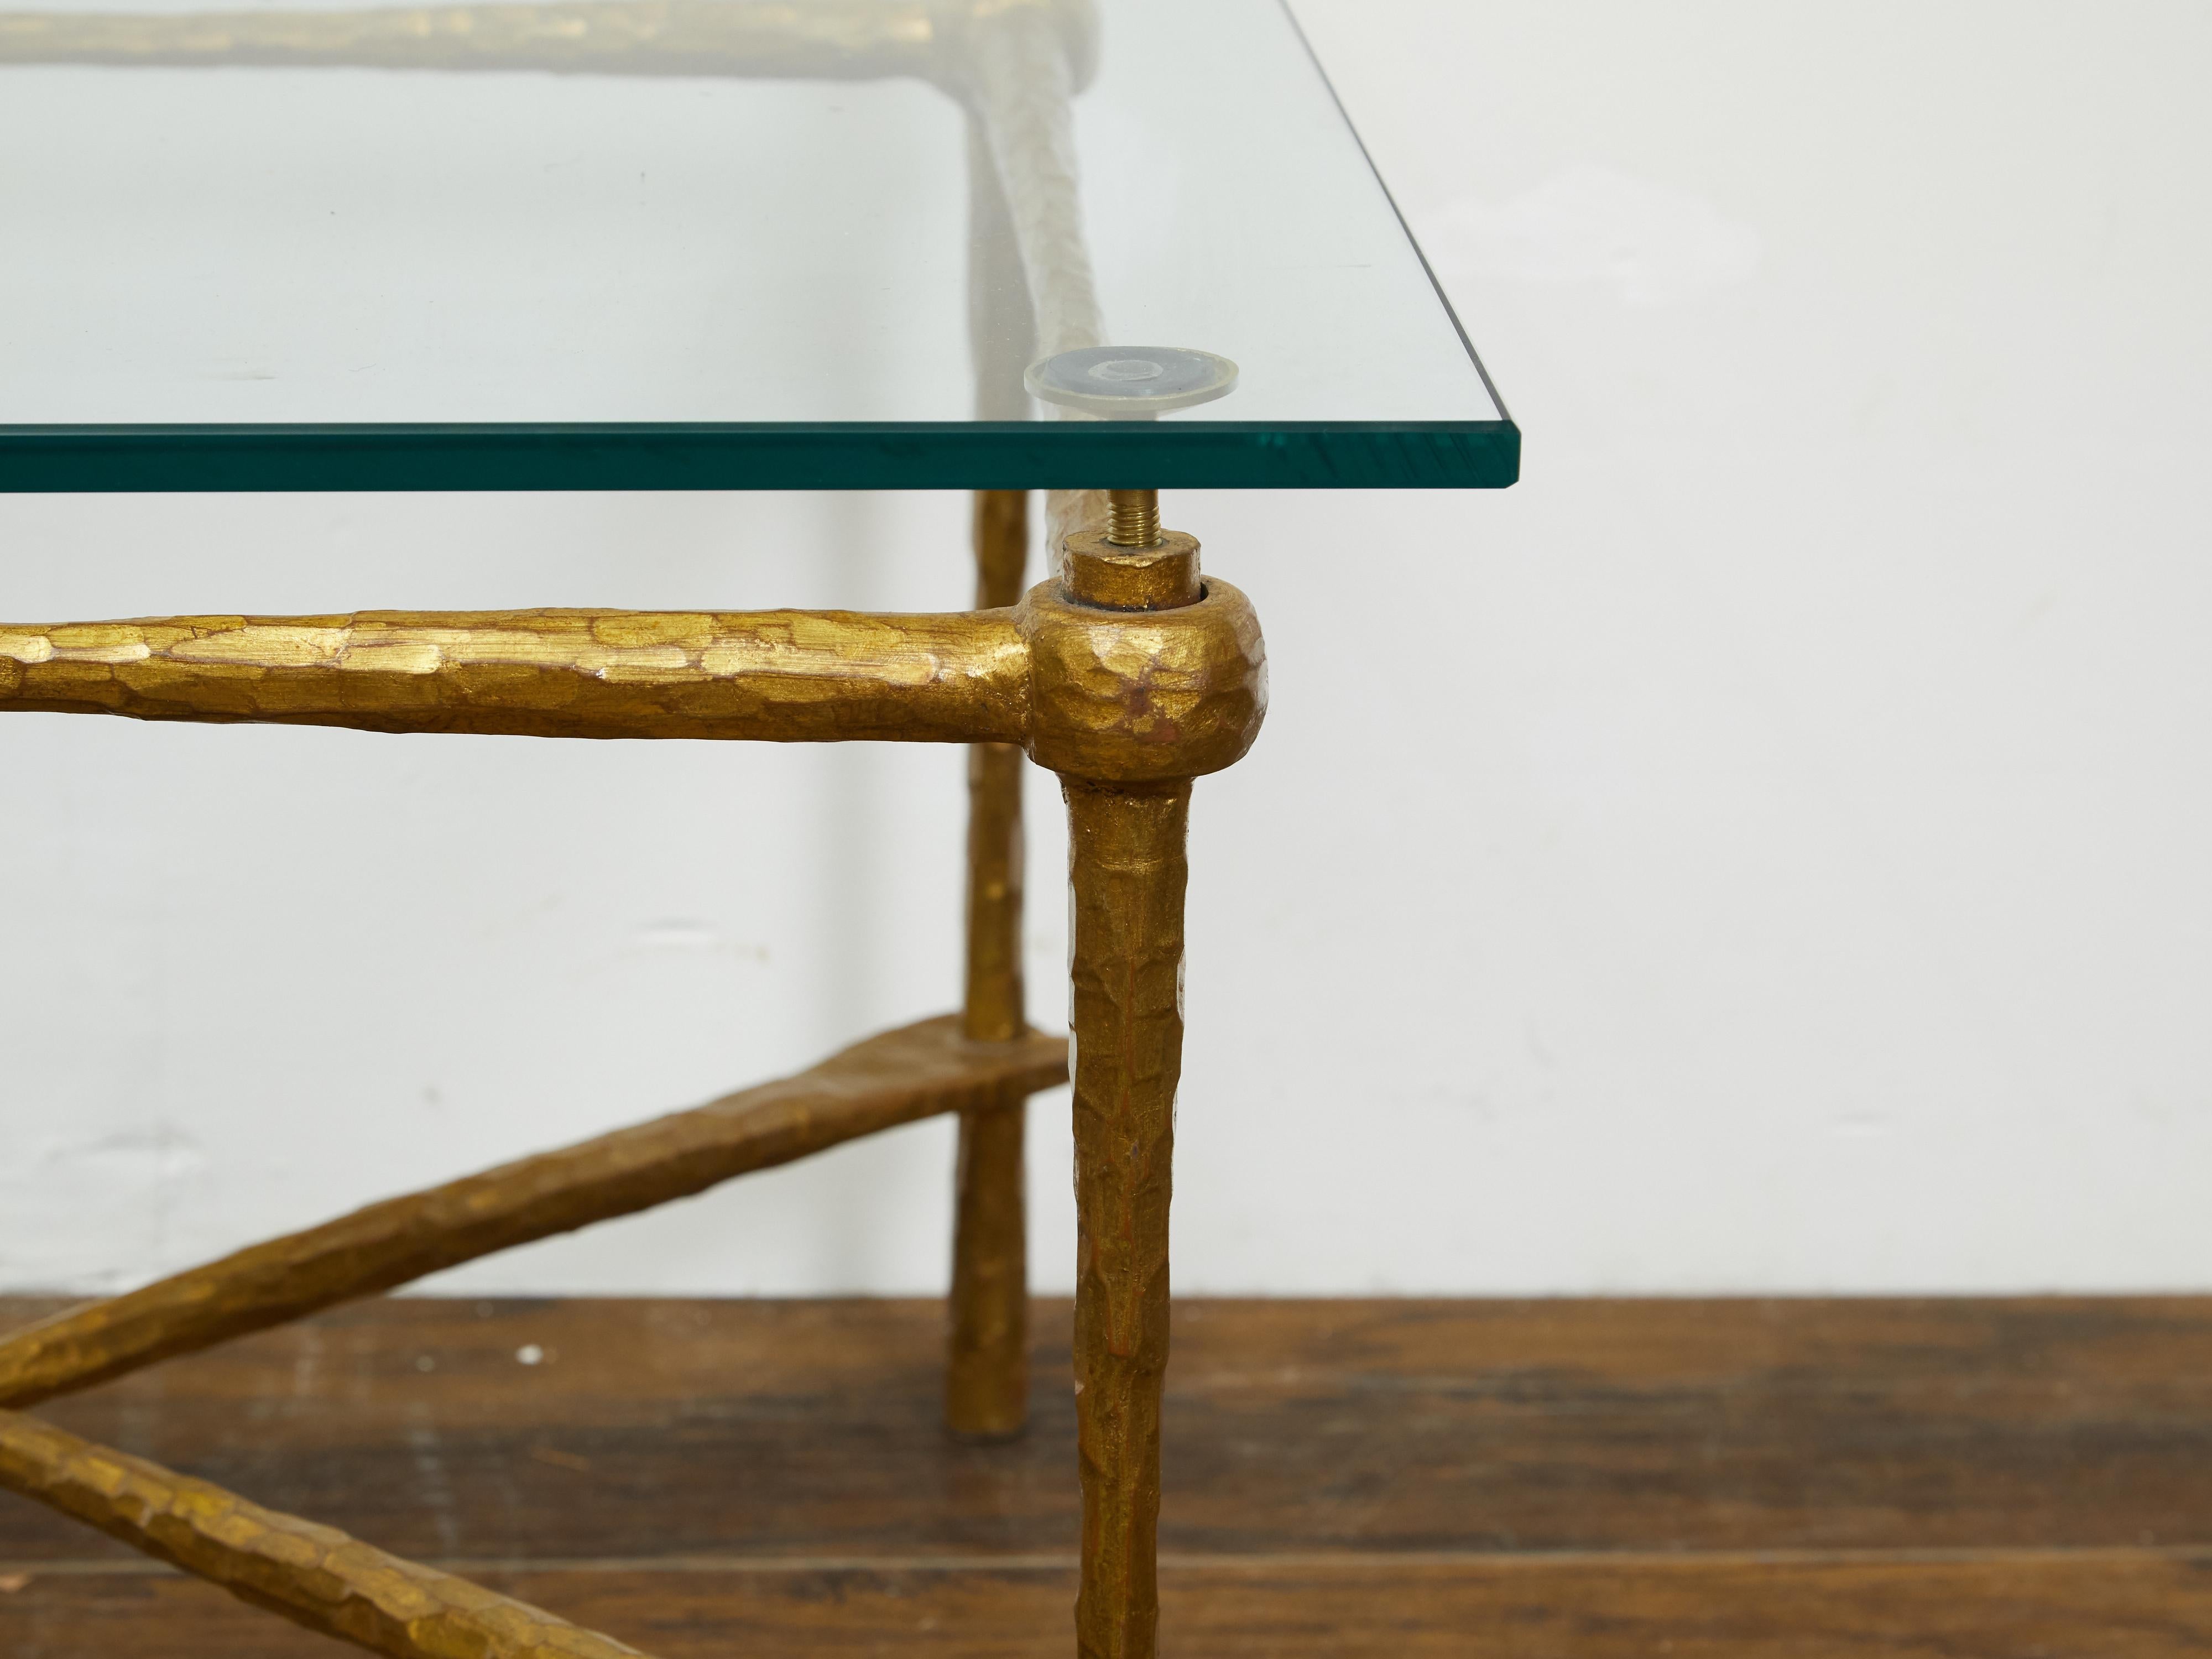 20th Century Italian Midcentury Gilt Metal Coffee Table with Glass Top and Hammered Accents For Sale